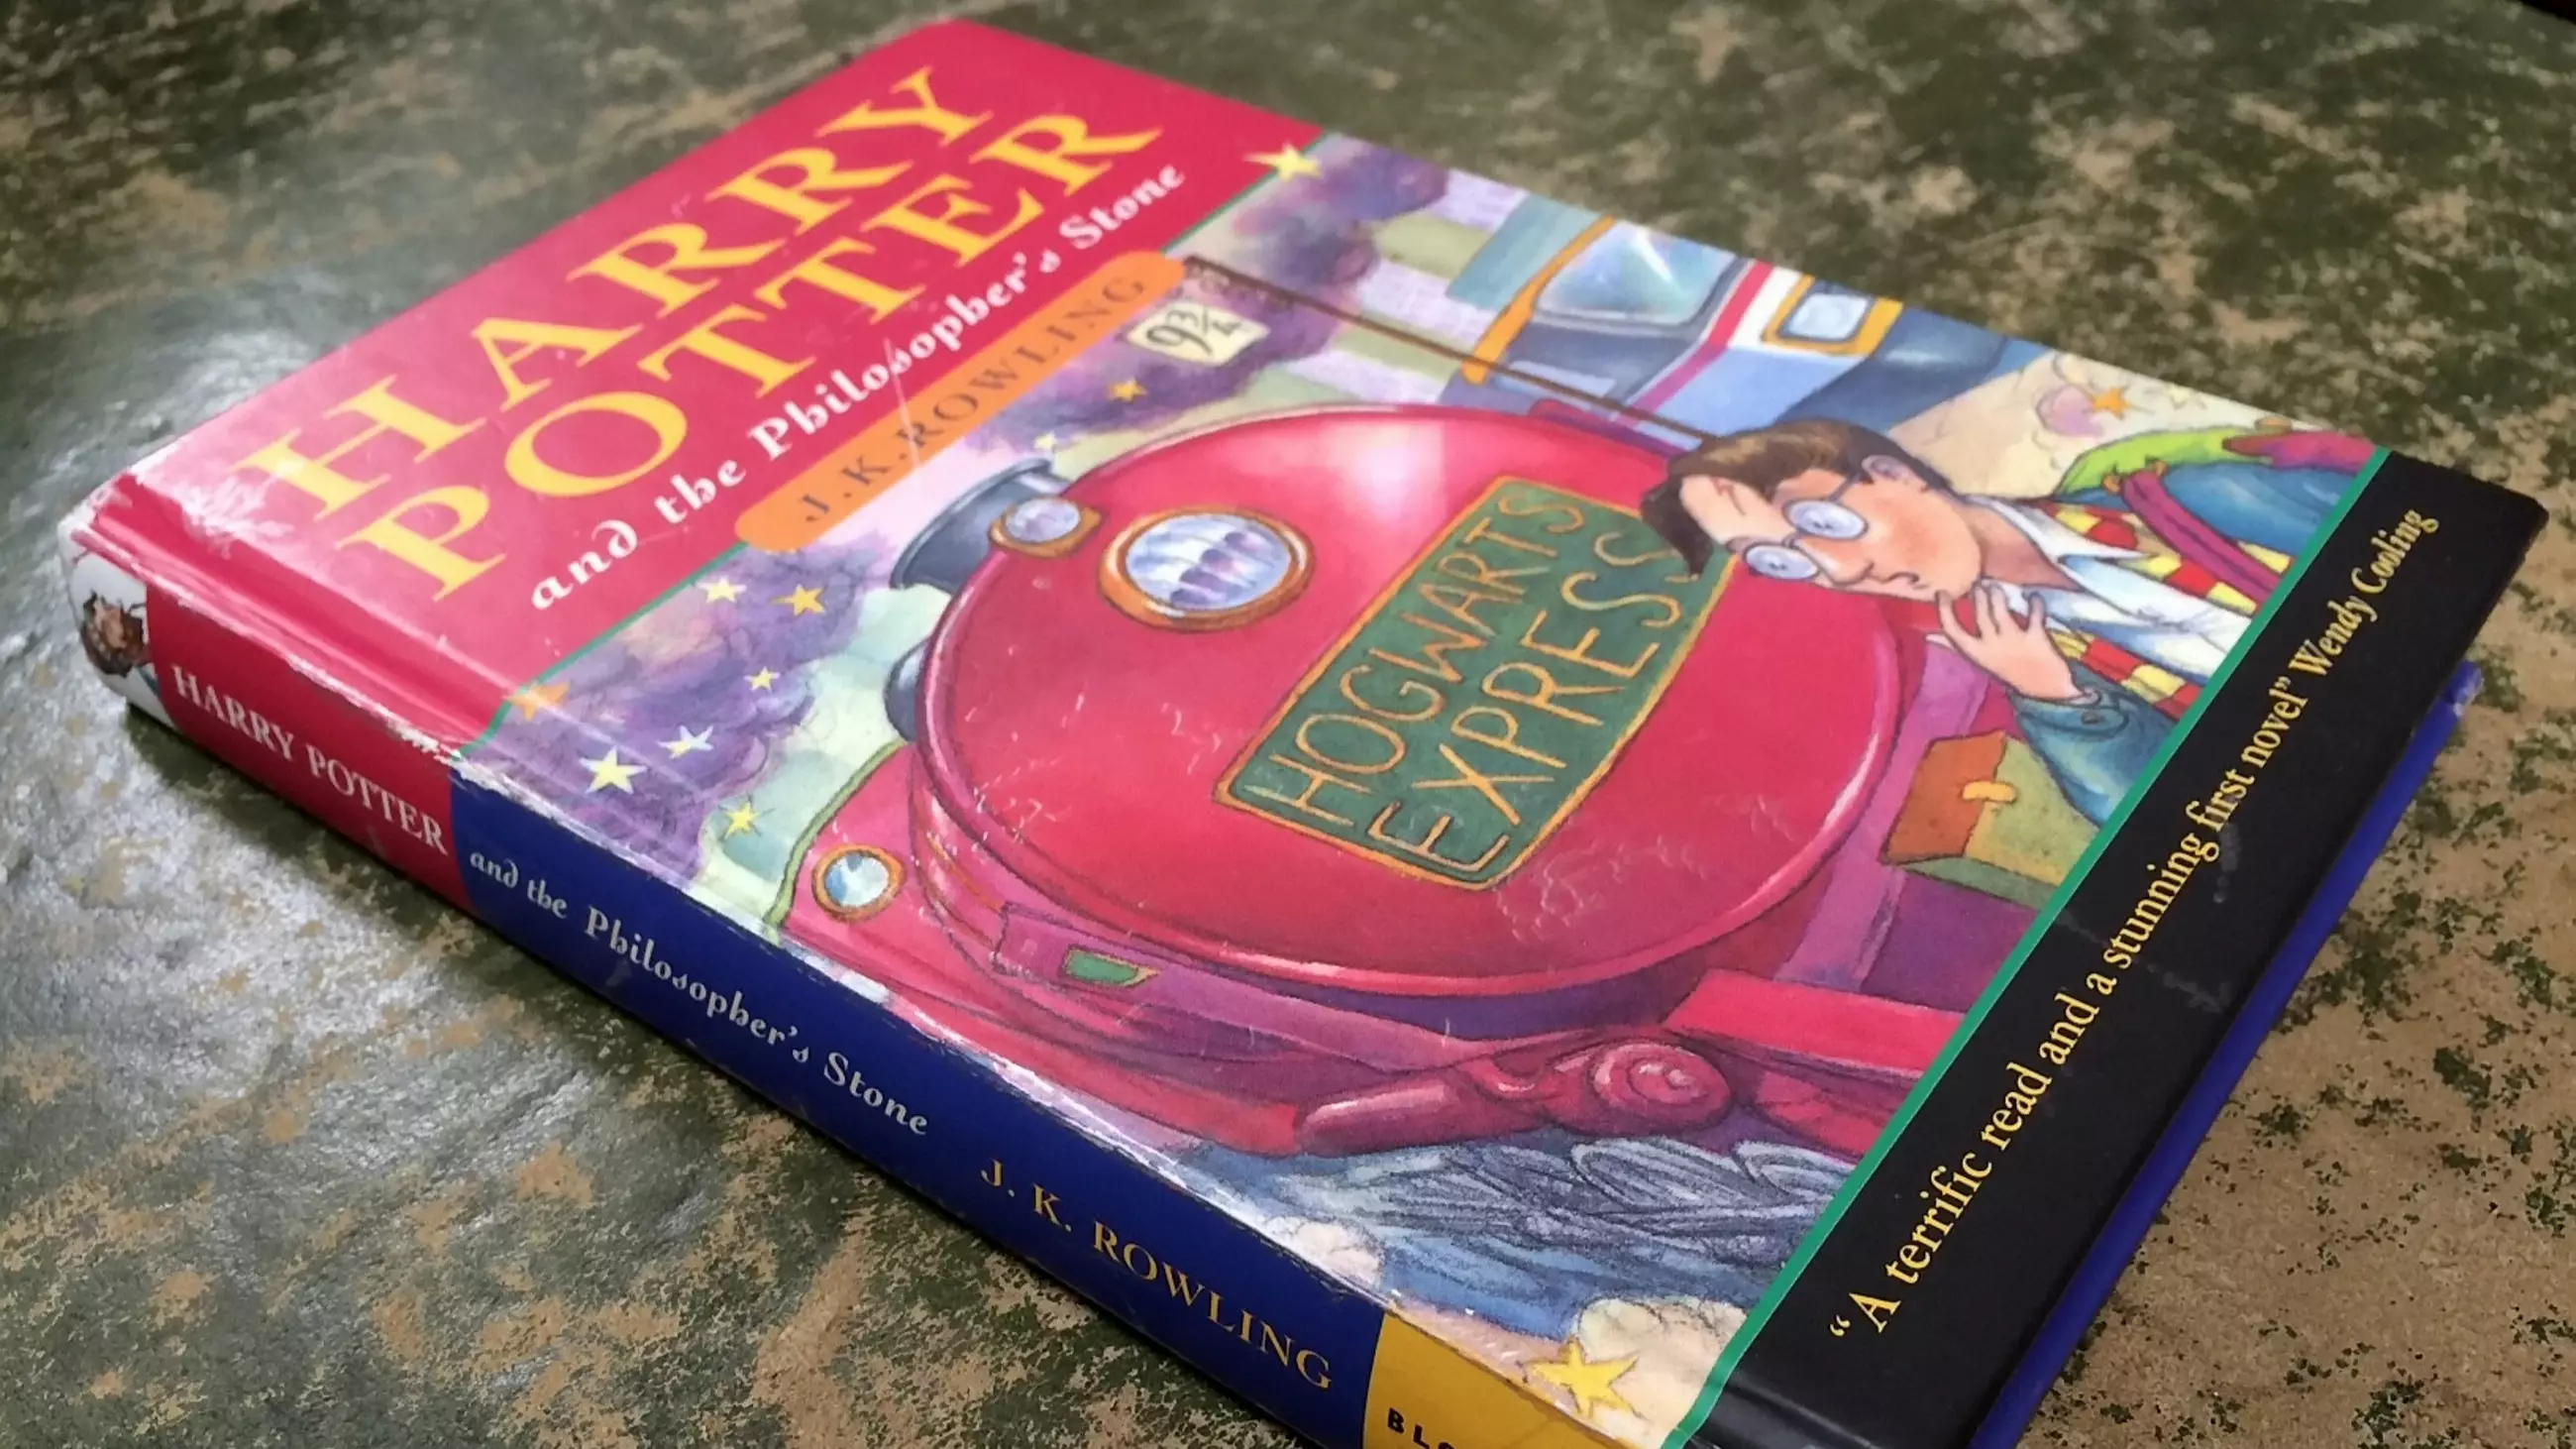 Rare First Edition Harry Potter Book Expected To Fetch £30,000 At Auction